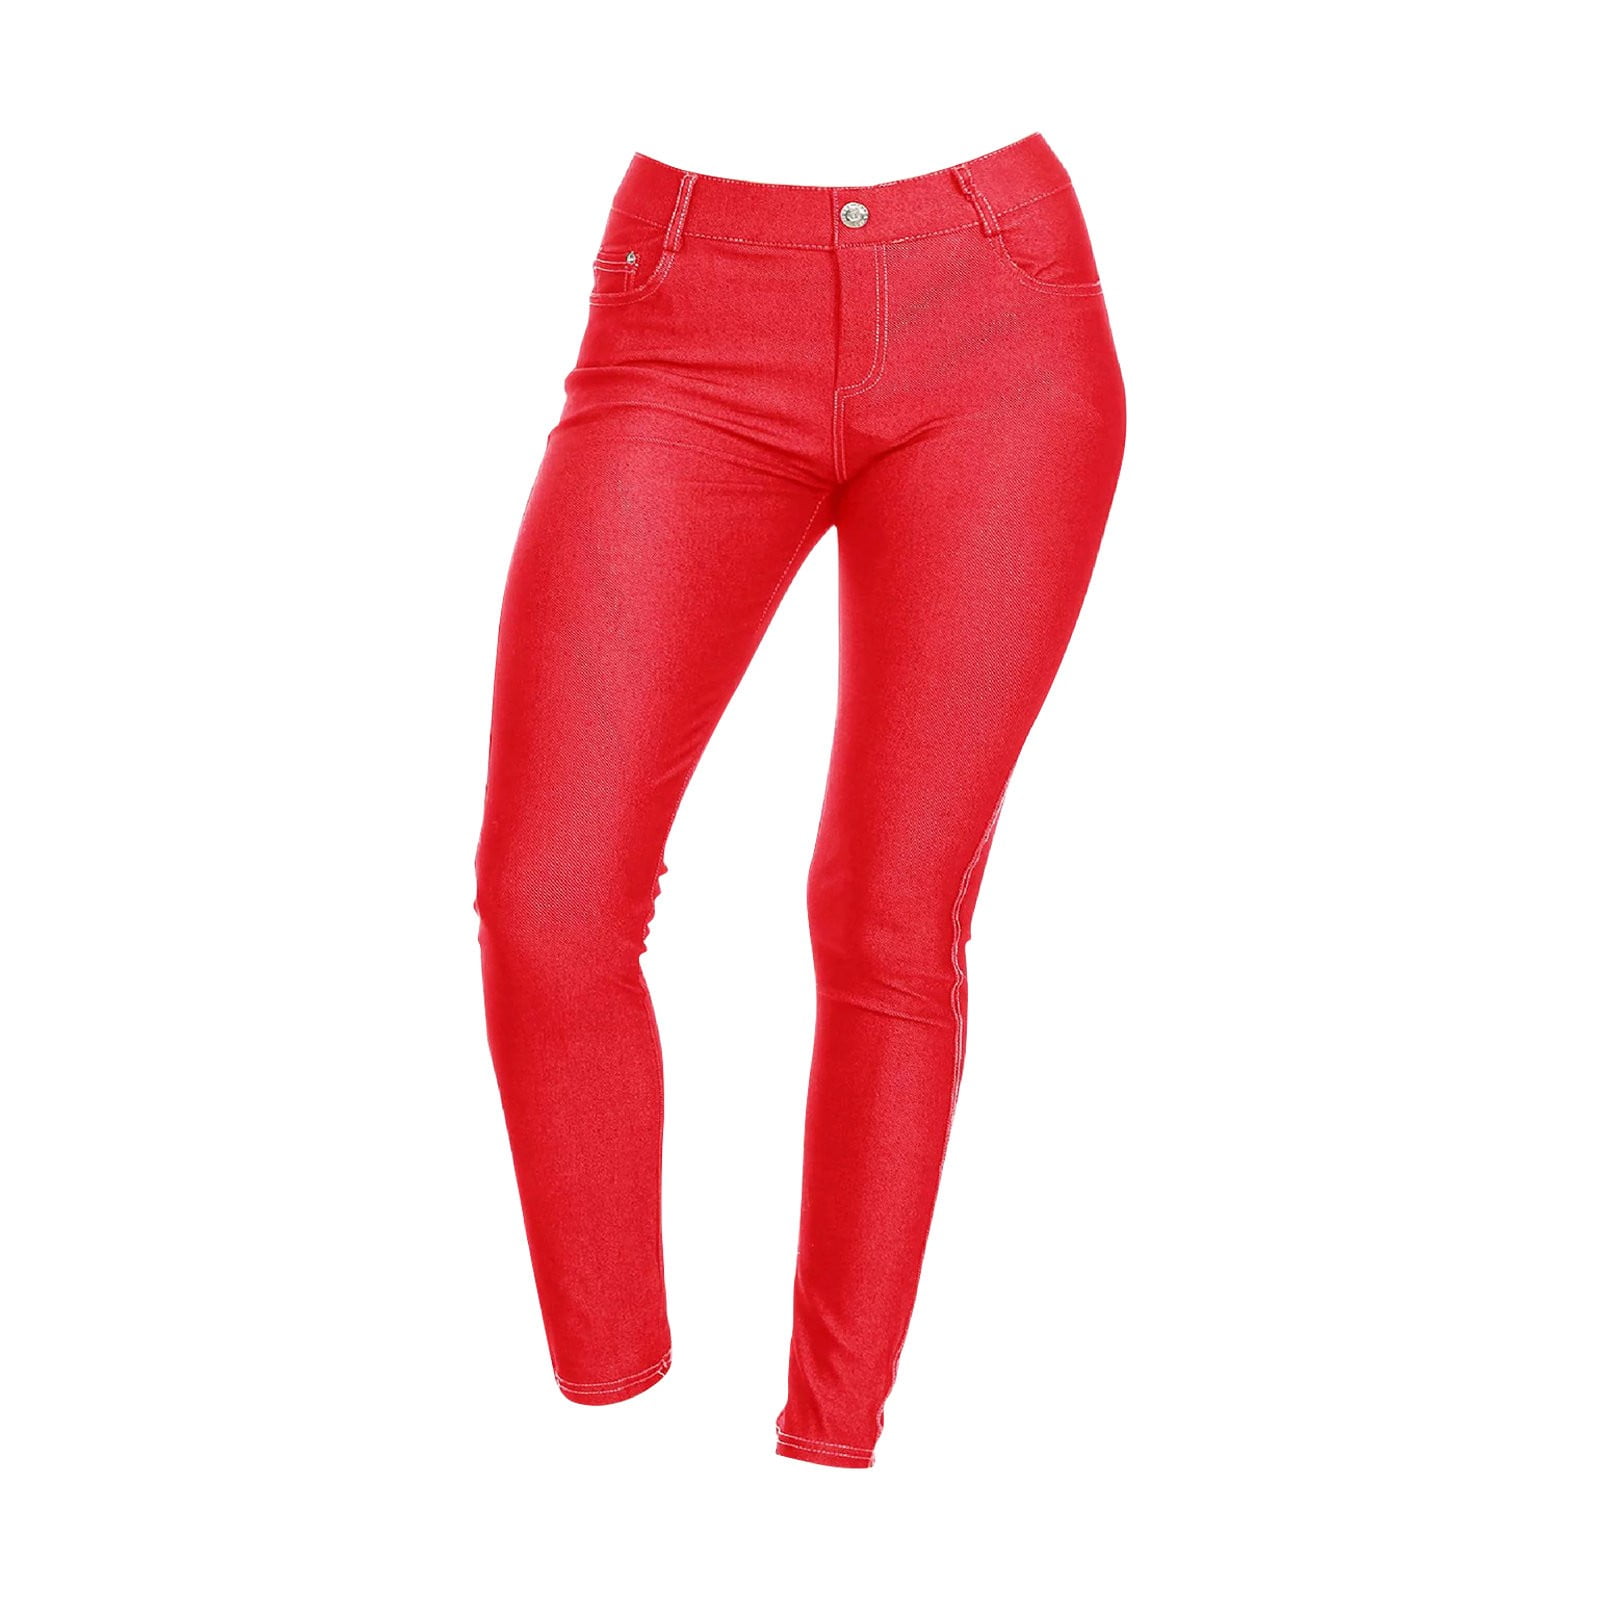 Huaai Pants for Women Women Color Candy Pencil Pants Casual Base Small ...